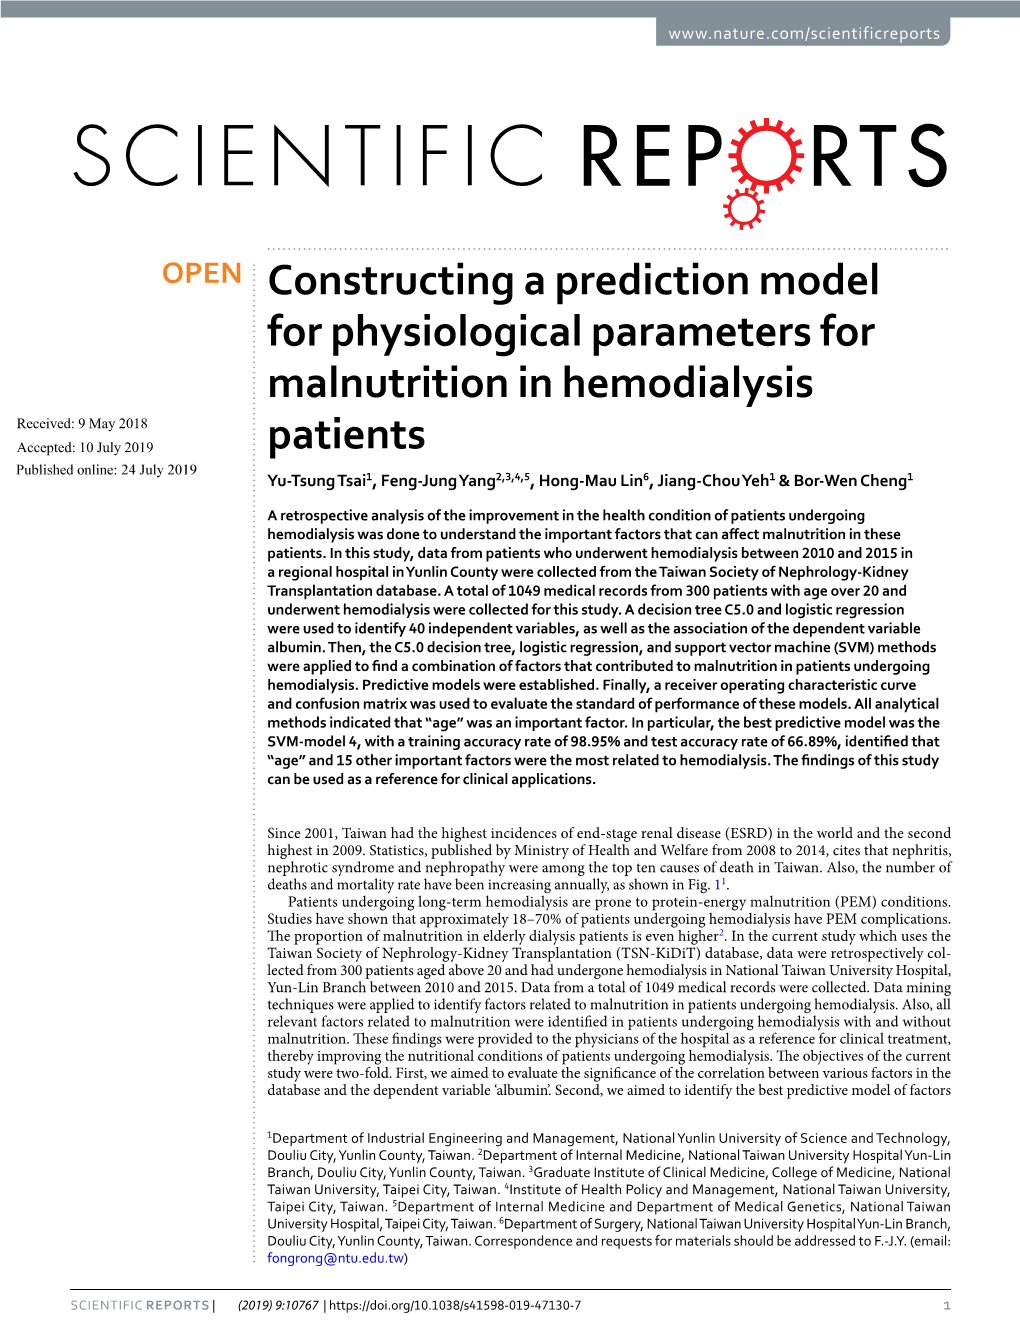 Constructing a Prediction Model for Physiological Parameters For